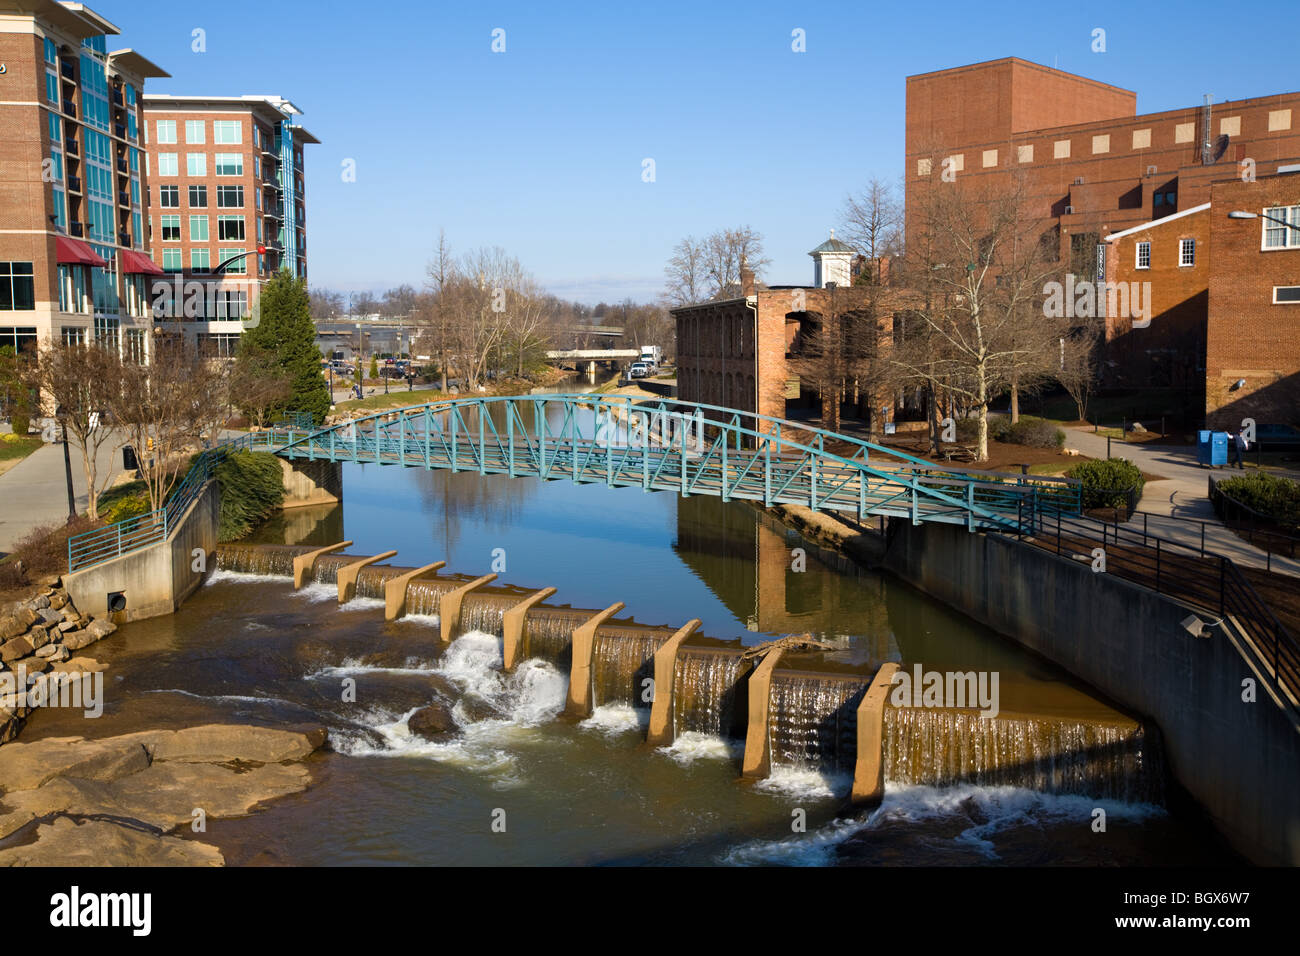 Falls Park on the Reedy River, downtown Greenville, South Carolina Stock Photo